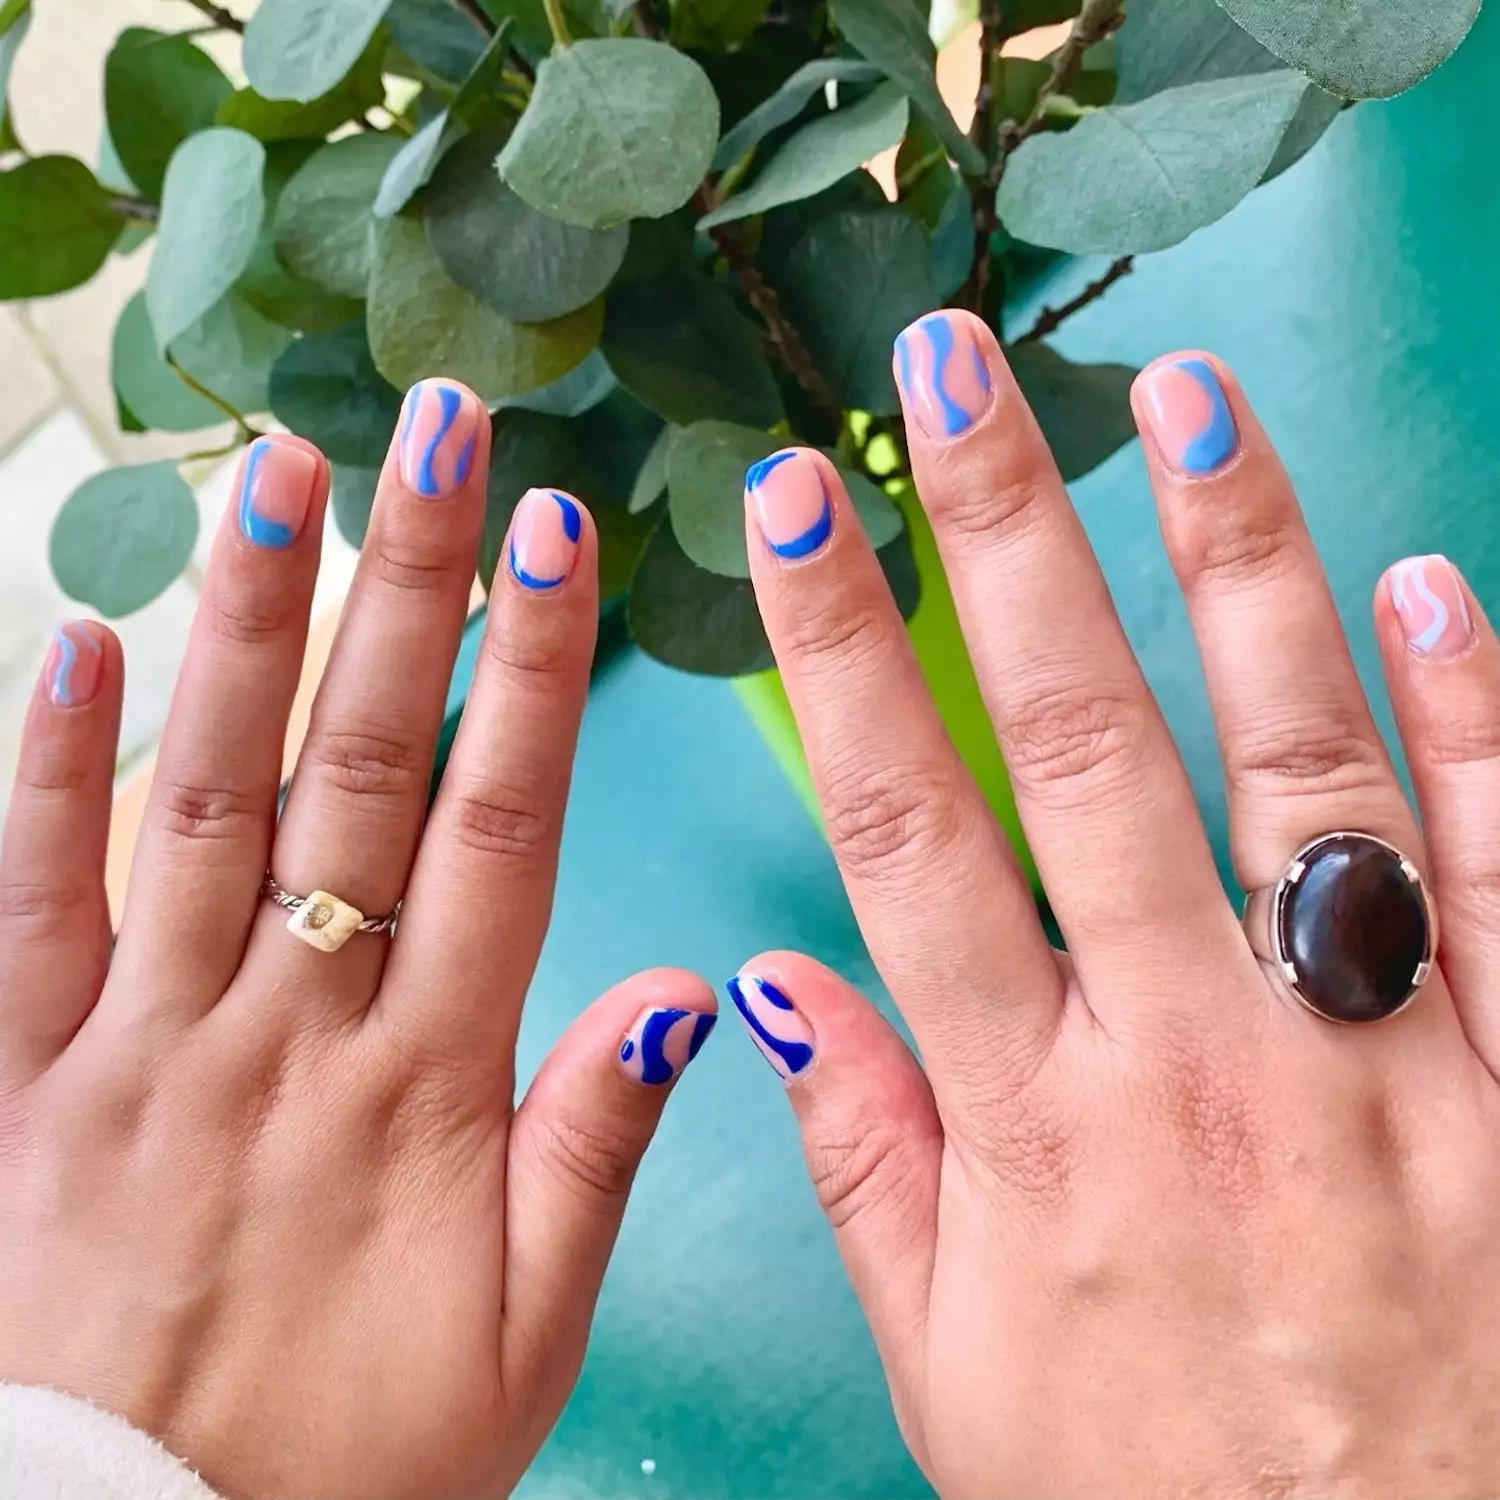 Manicure with abstract wavy designs in various shades of blue